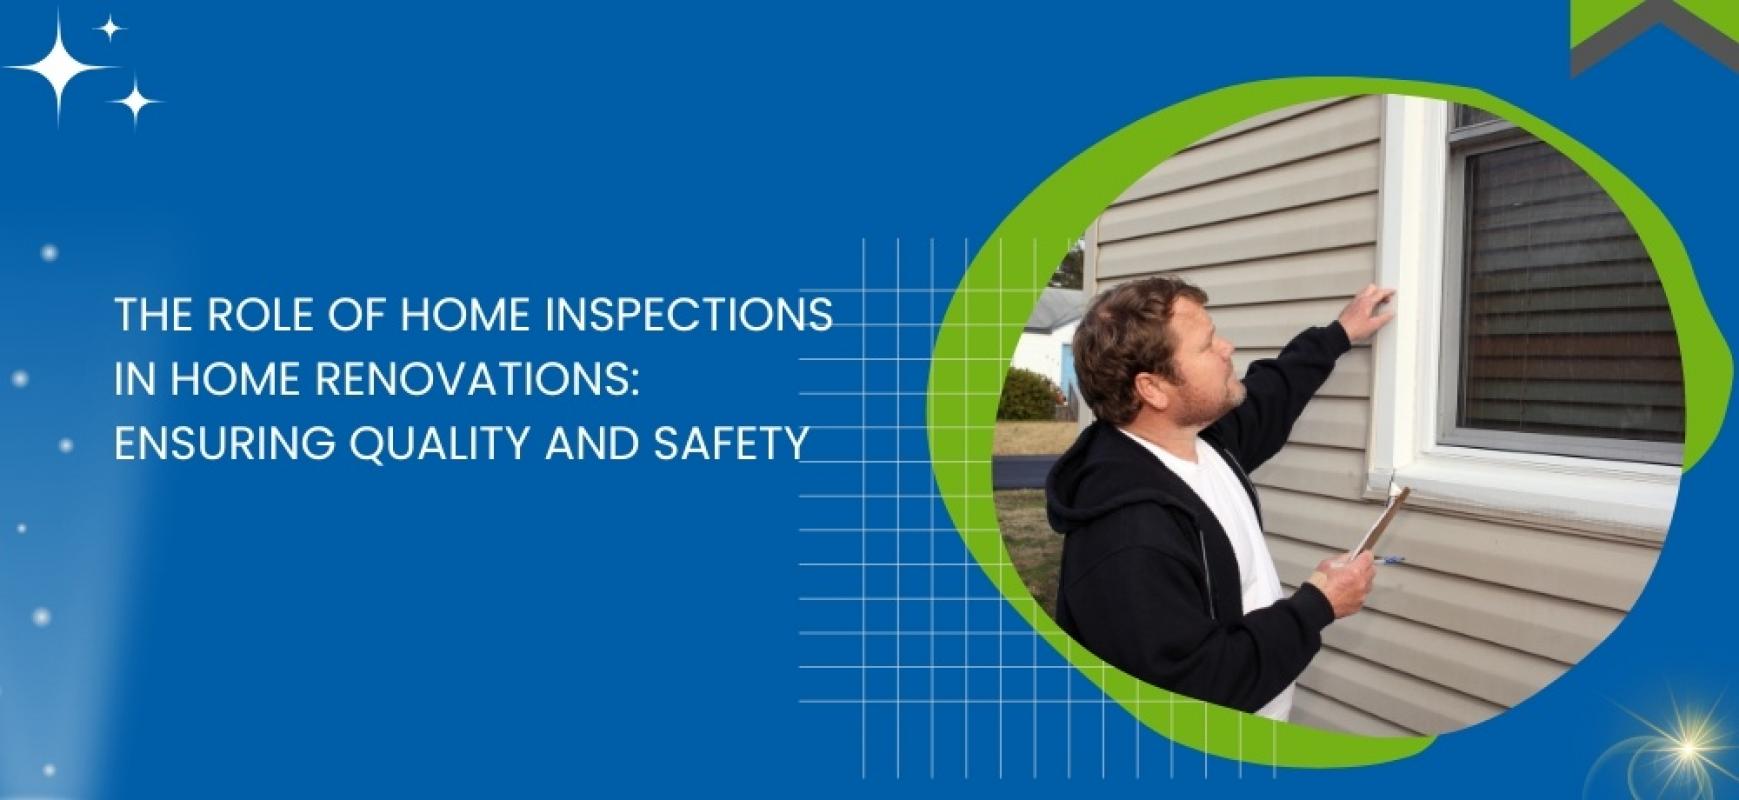 The Role of Home Inspections in Home Renovations: Ensuring Quality and Safety